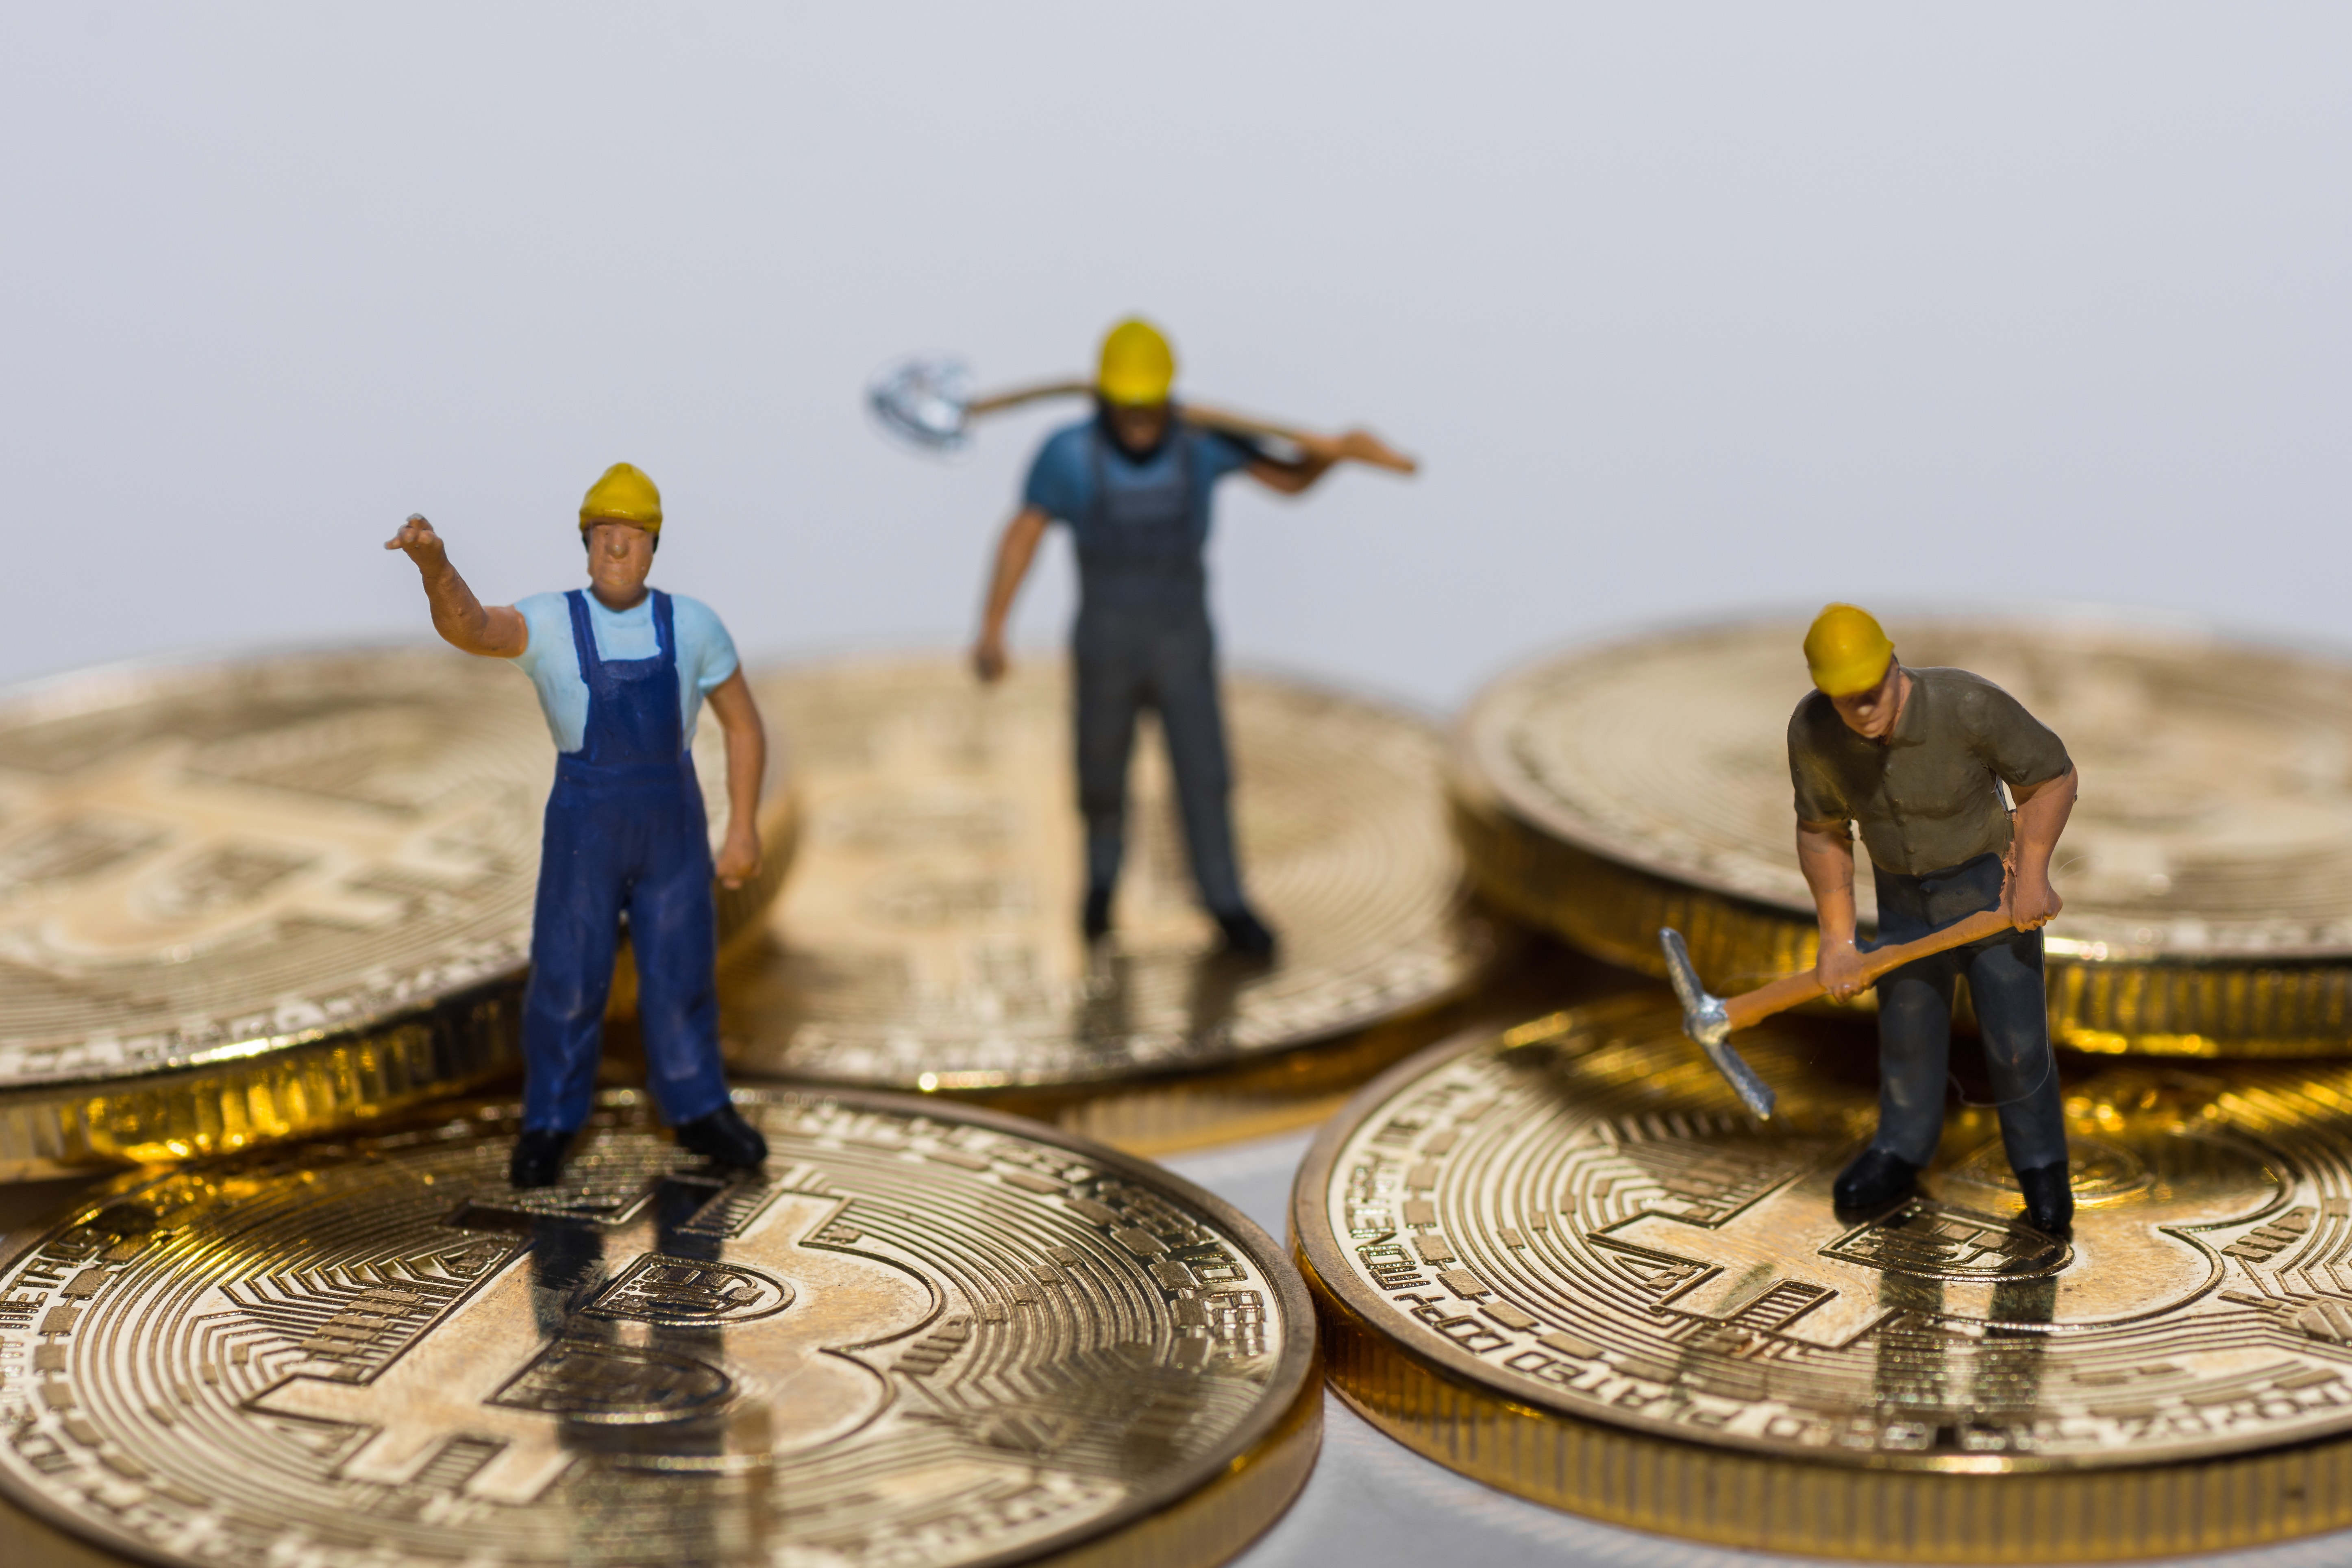 These Public Bitcoin Miners Give Up On 'Hodl-At-Any-Cost' Strategy,' Sell Heavily At 'Fire-Sale' Prices In June